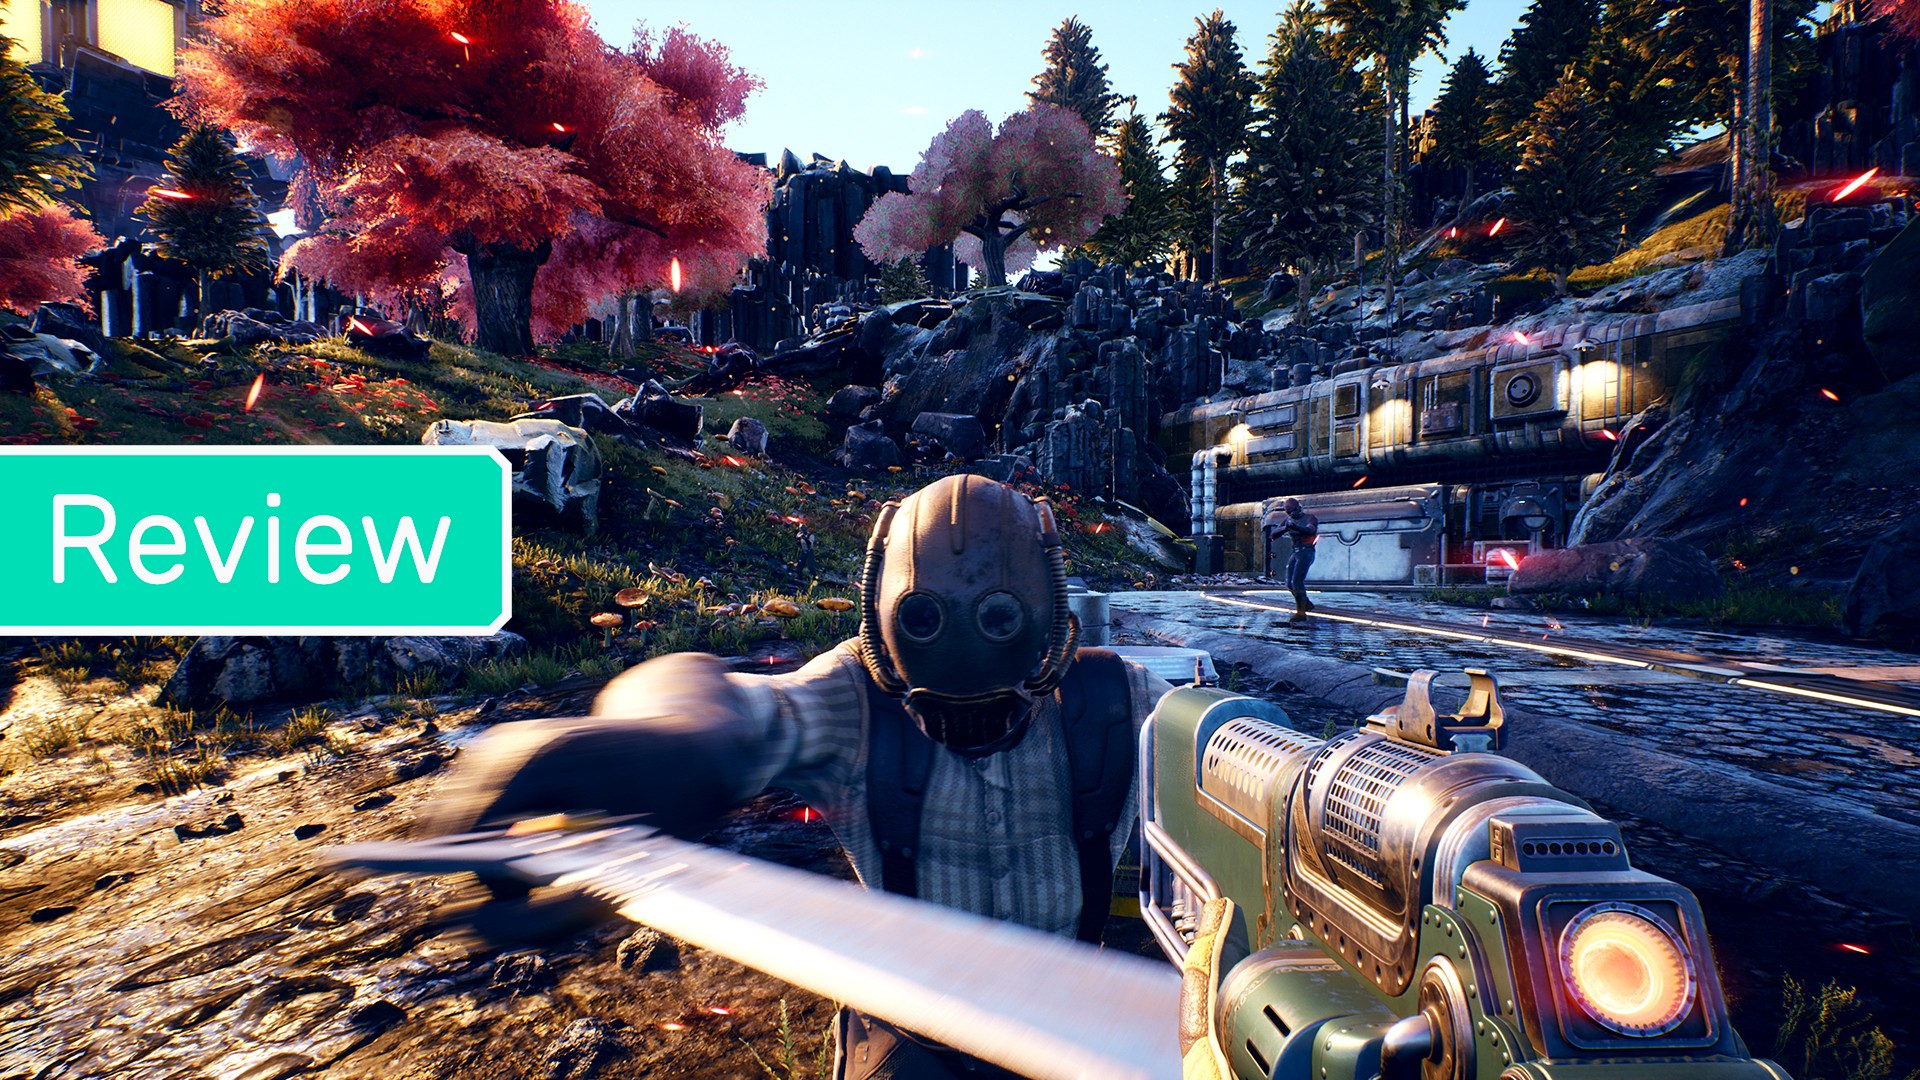 THE OUTER WORLDS Reviewed: Here's what we think about Obsidian's New Space  RPG, by GamesPuff